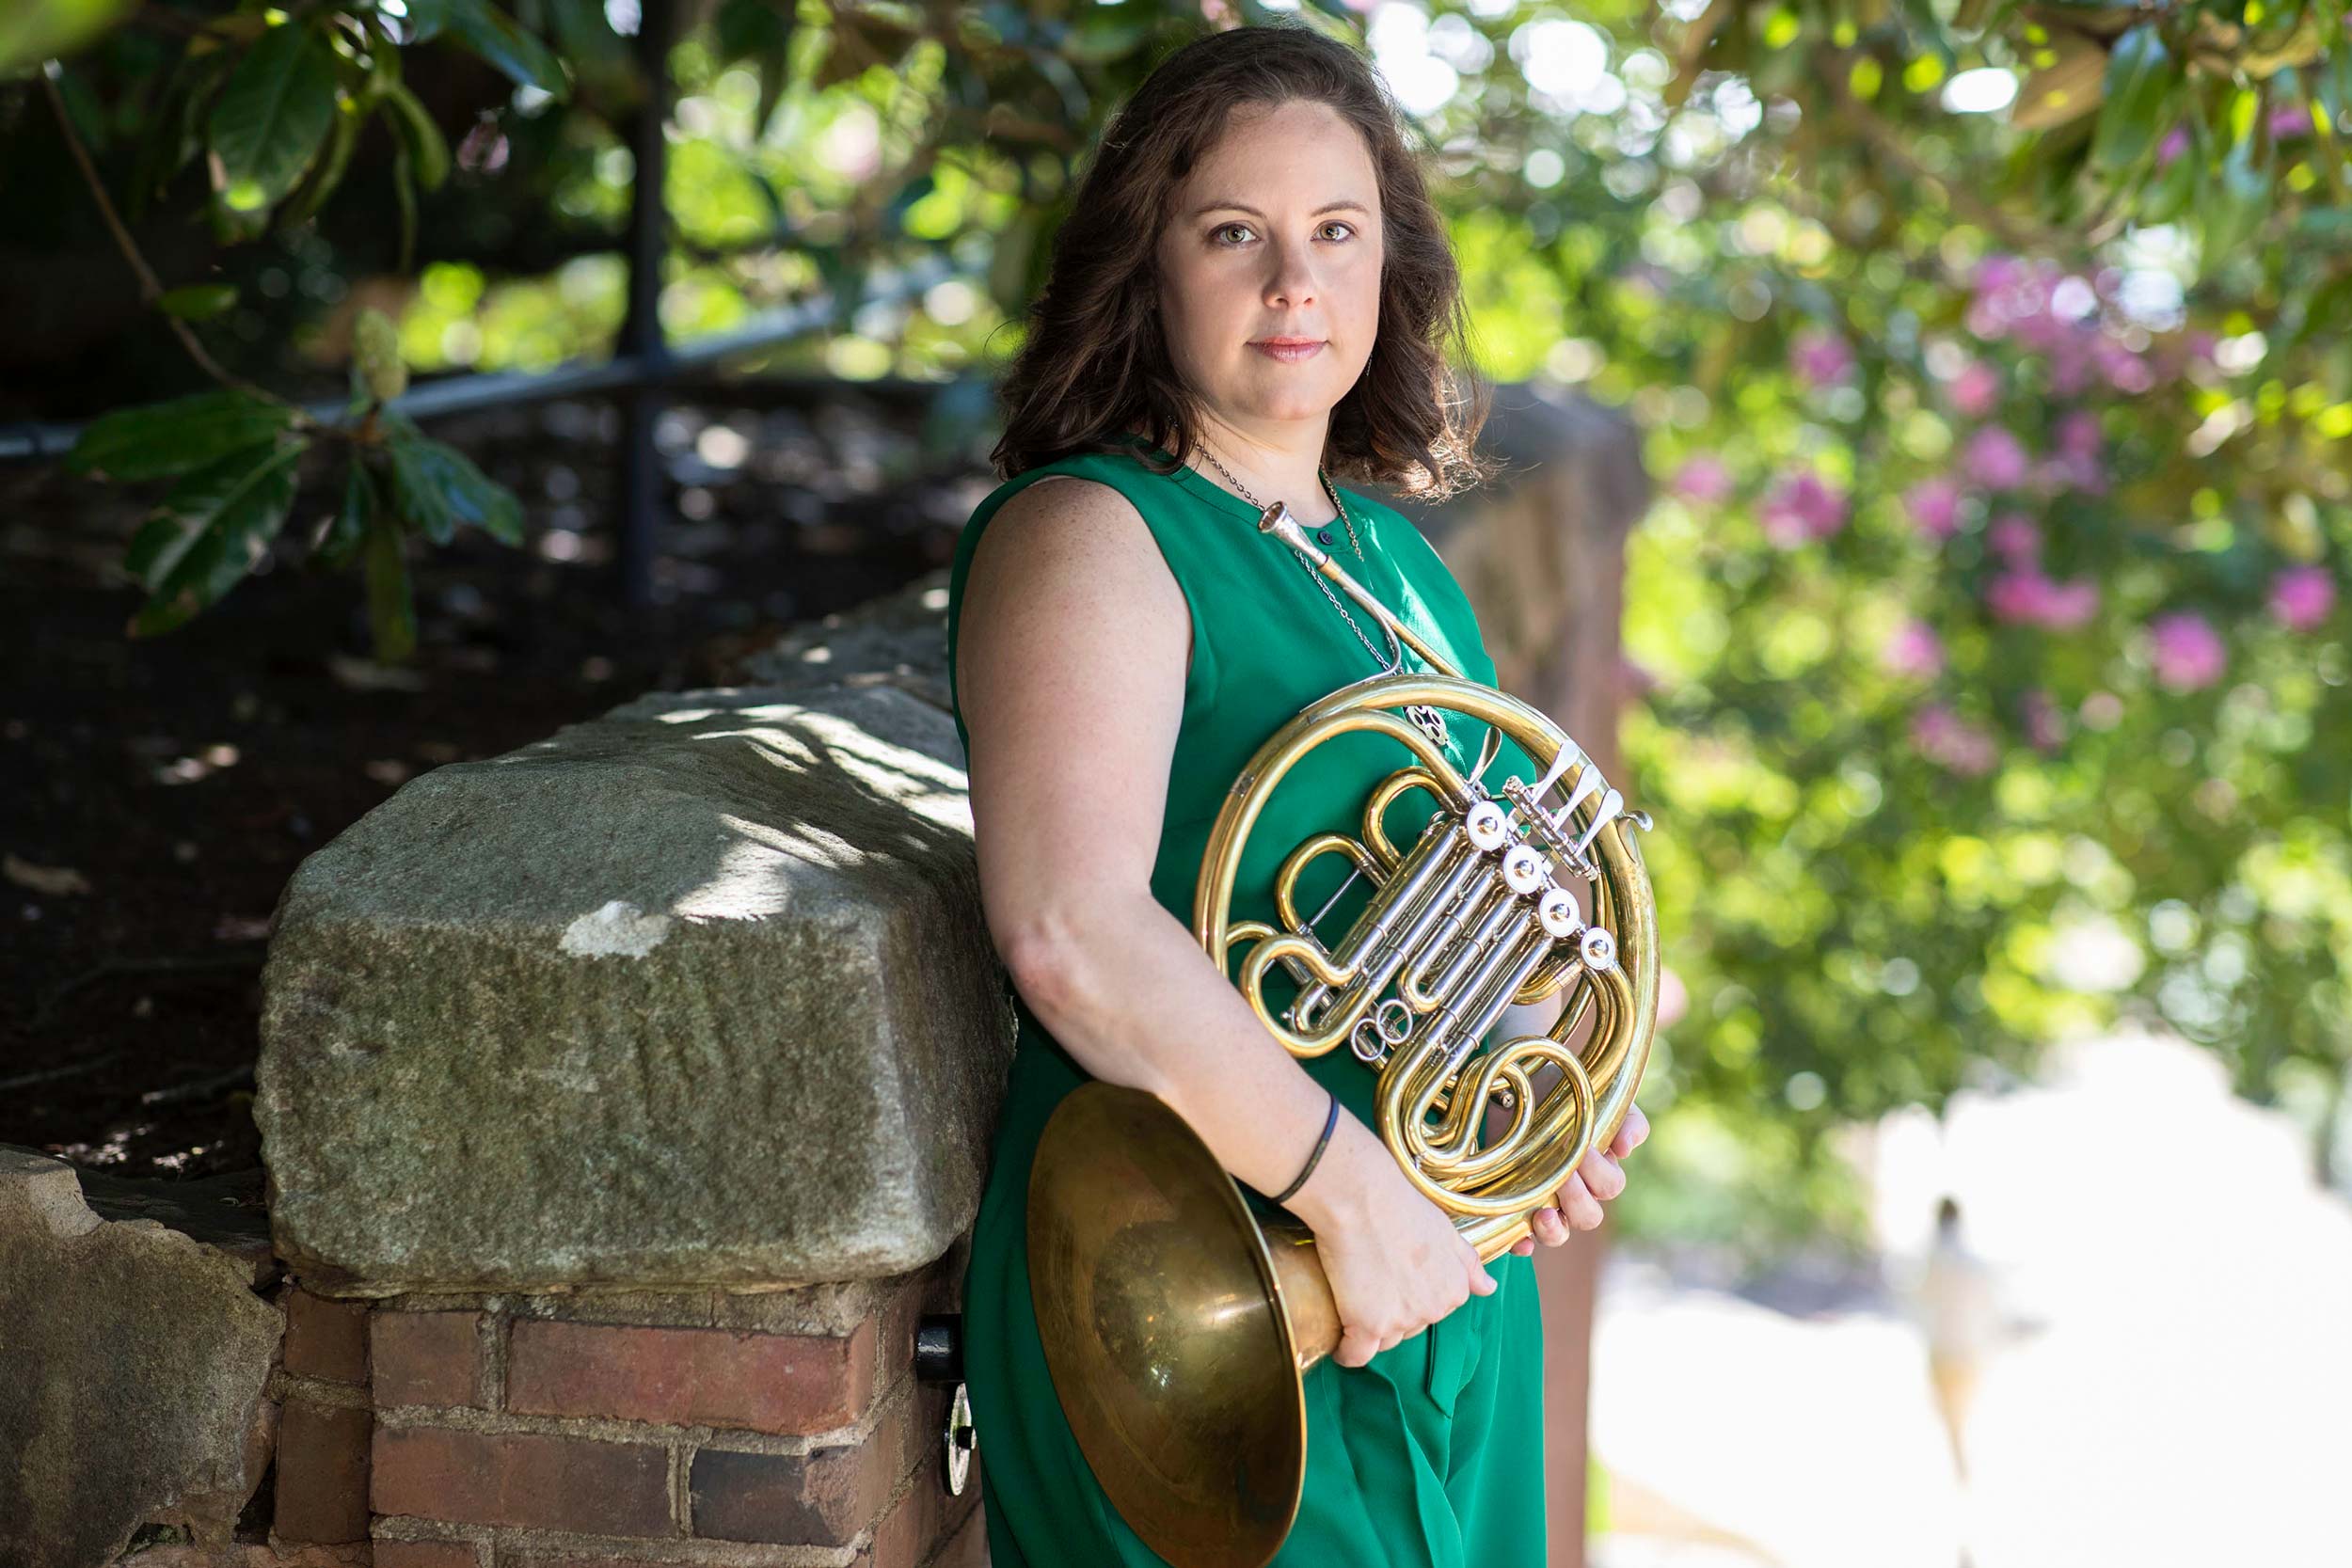 Katy Ambrose holds a french horn next to a brick wall